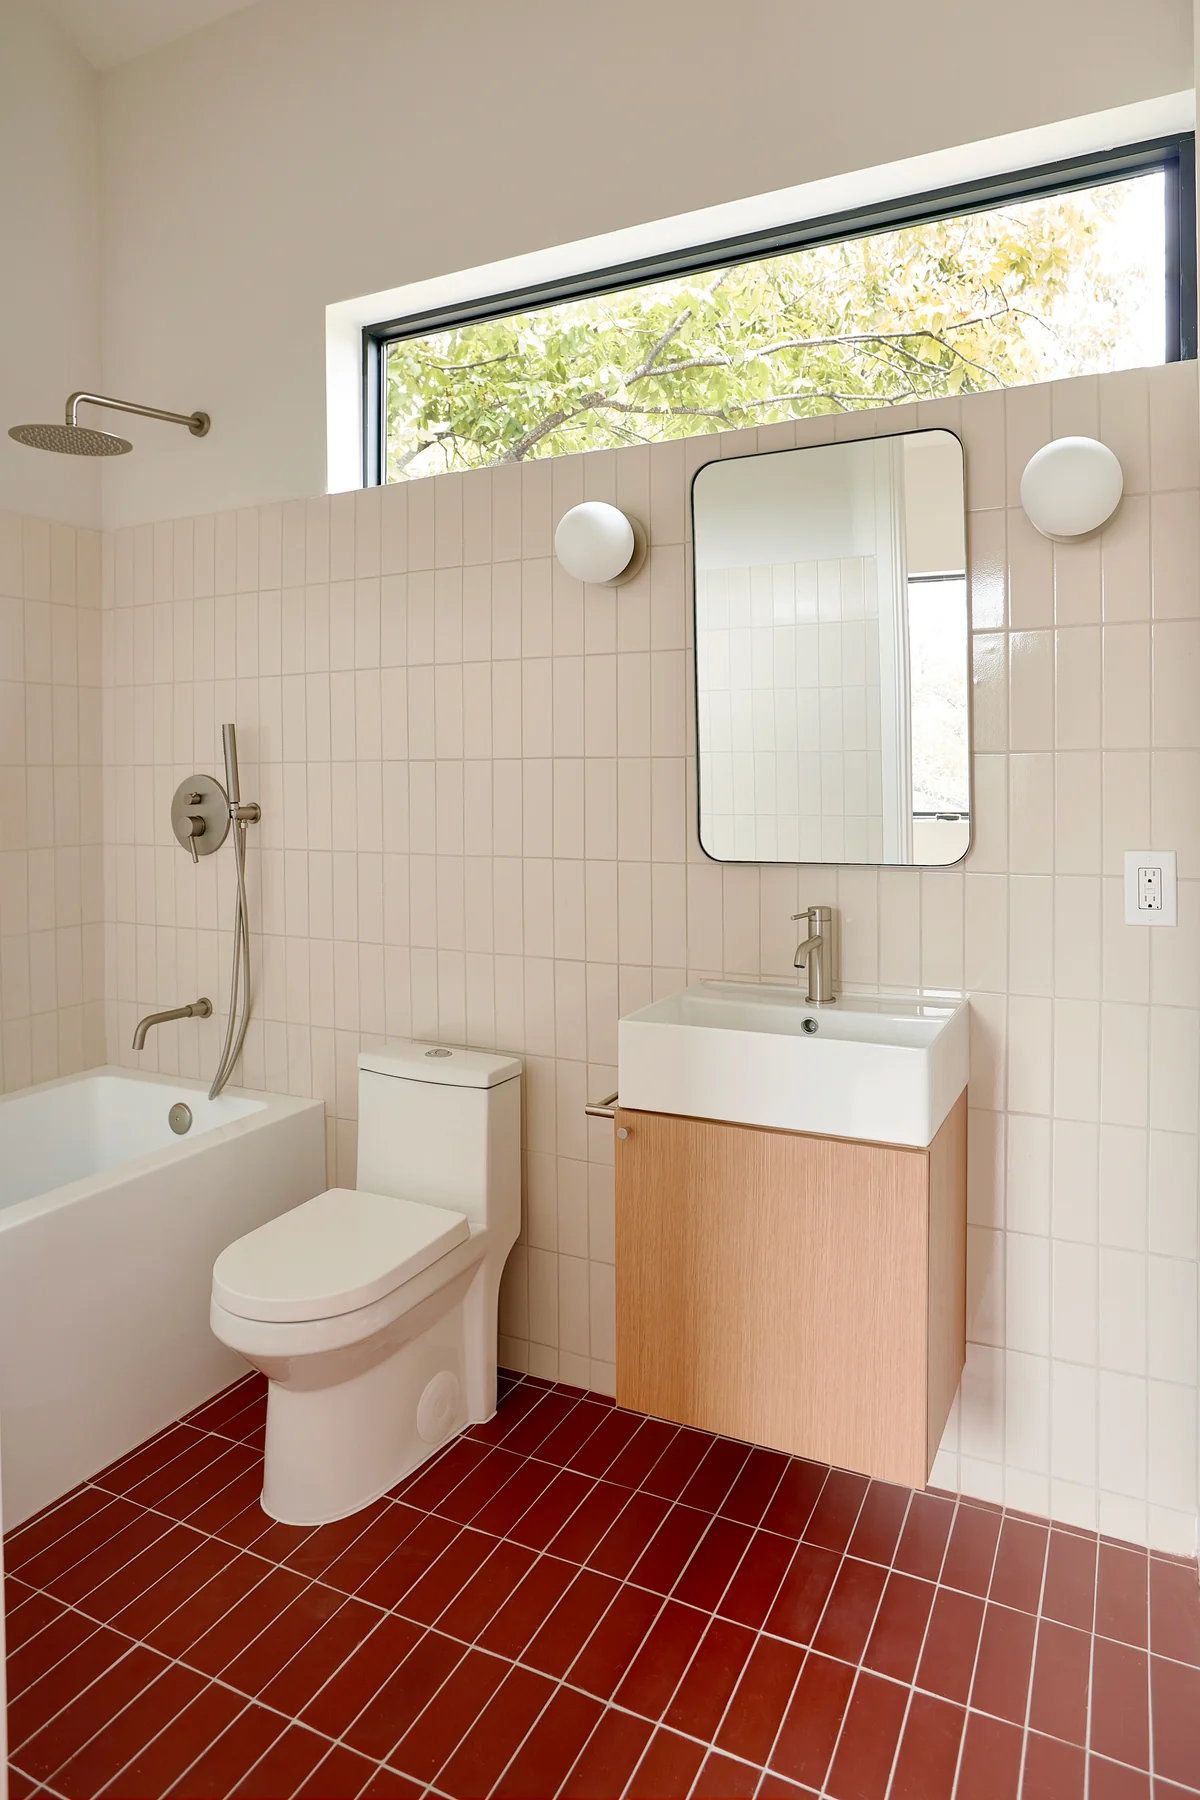 Modern bathroom design with red and white tiles